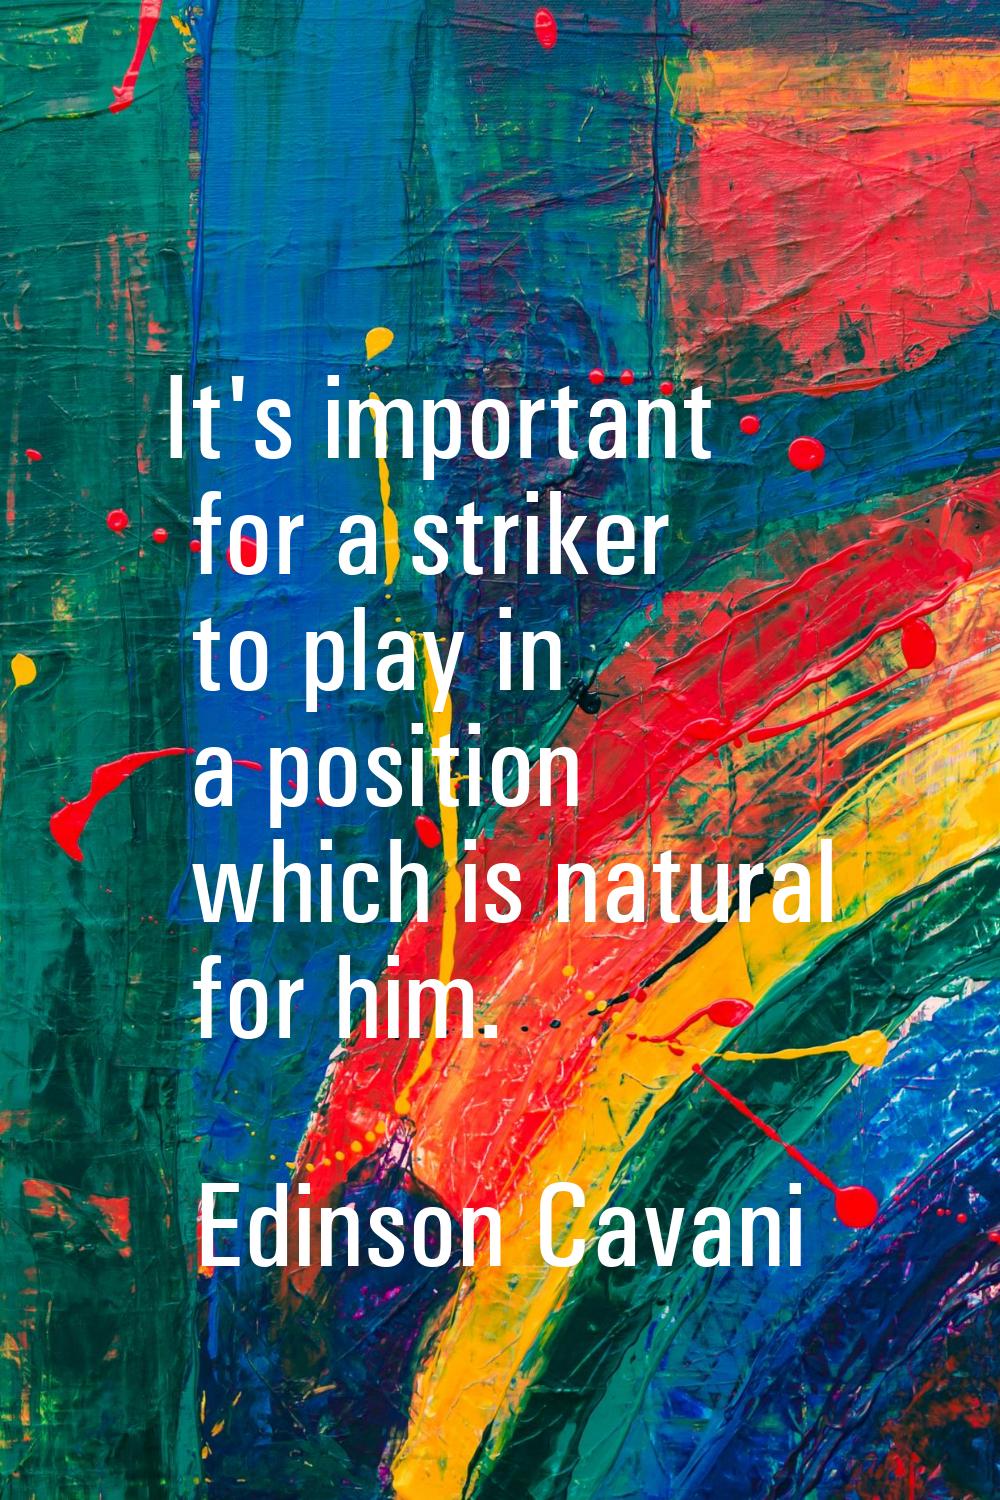 It's important for a striker to play in a position which is natural for him.